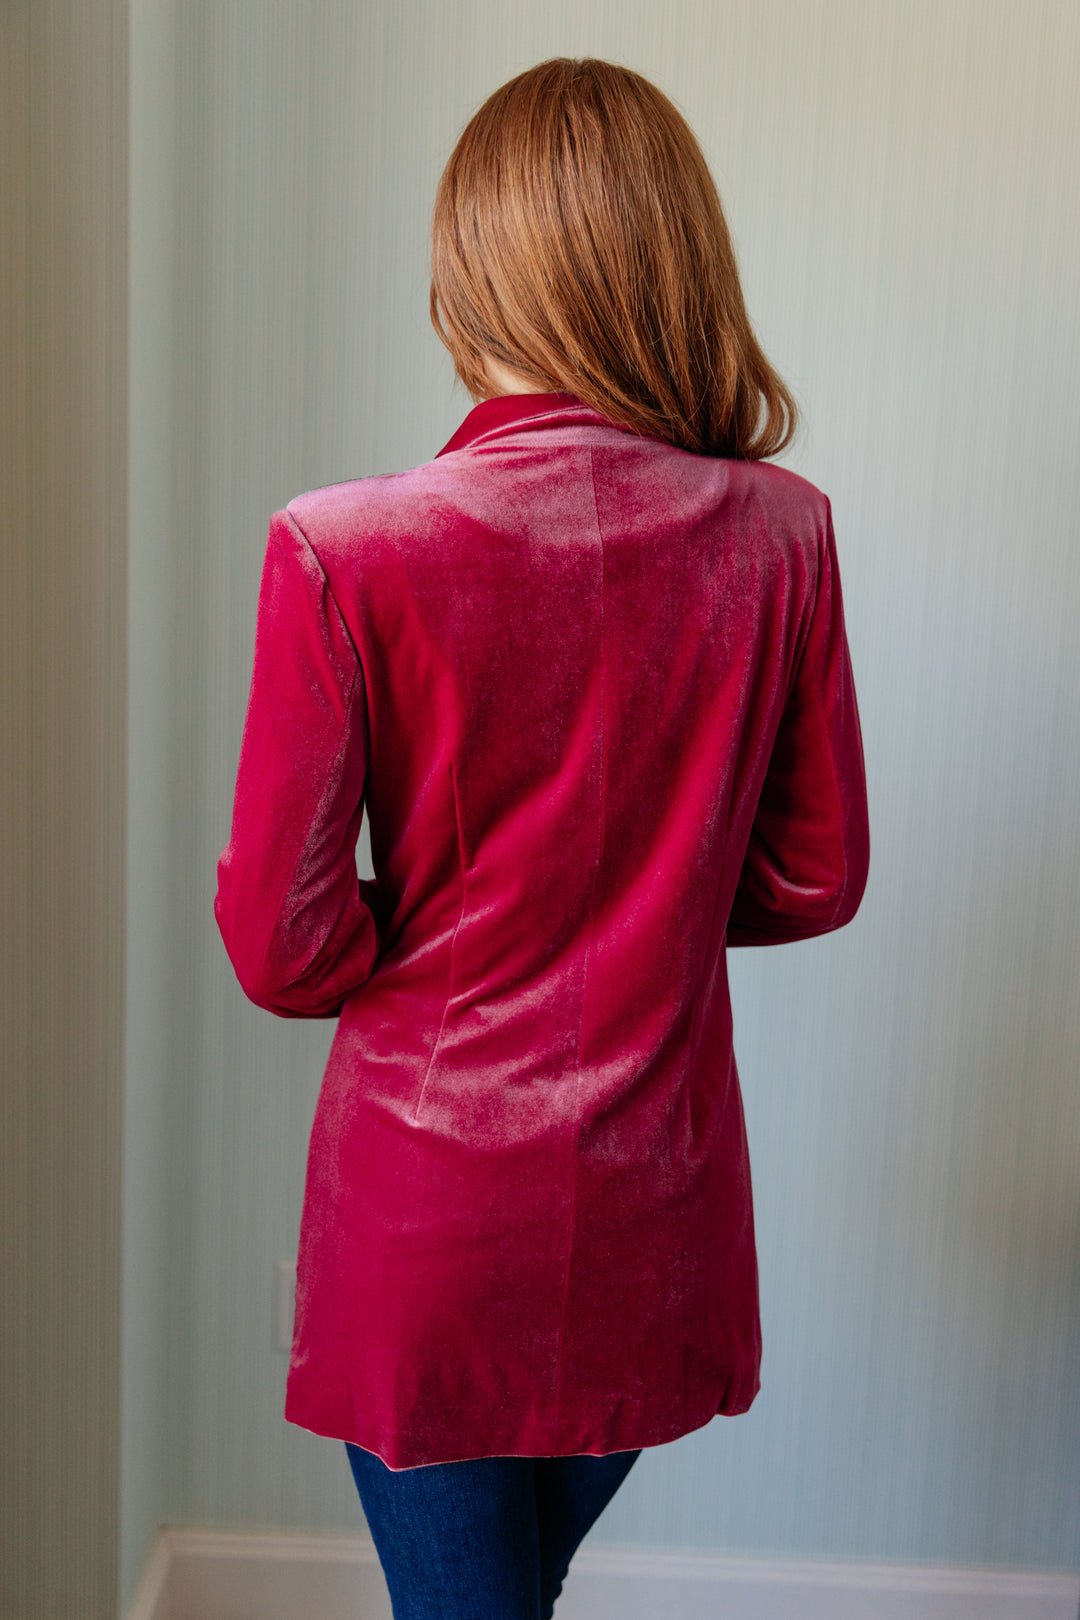 Verity Velvet Blazer-Outerwear-Inspired by Justeen-Women's Clothing Boutique in Chicago, Illinois